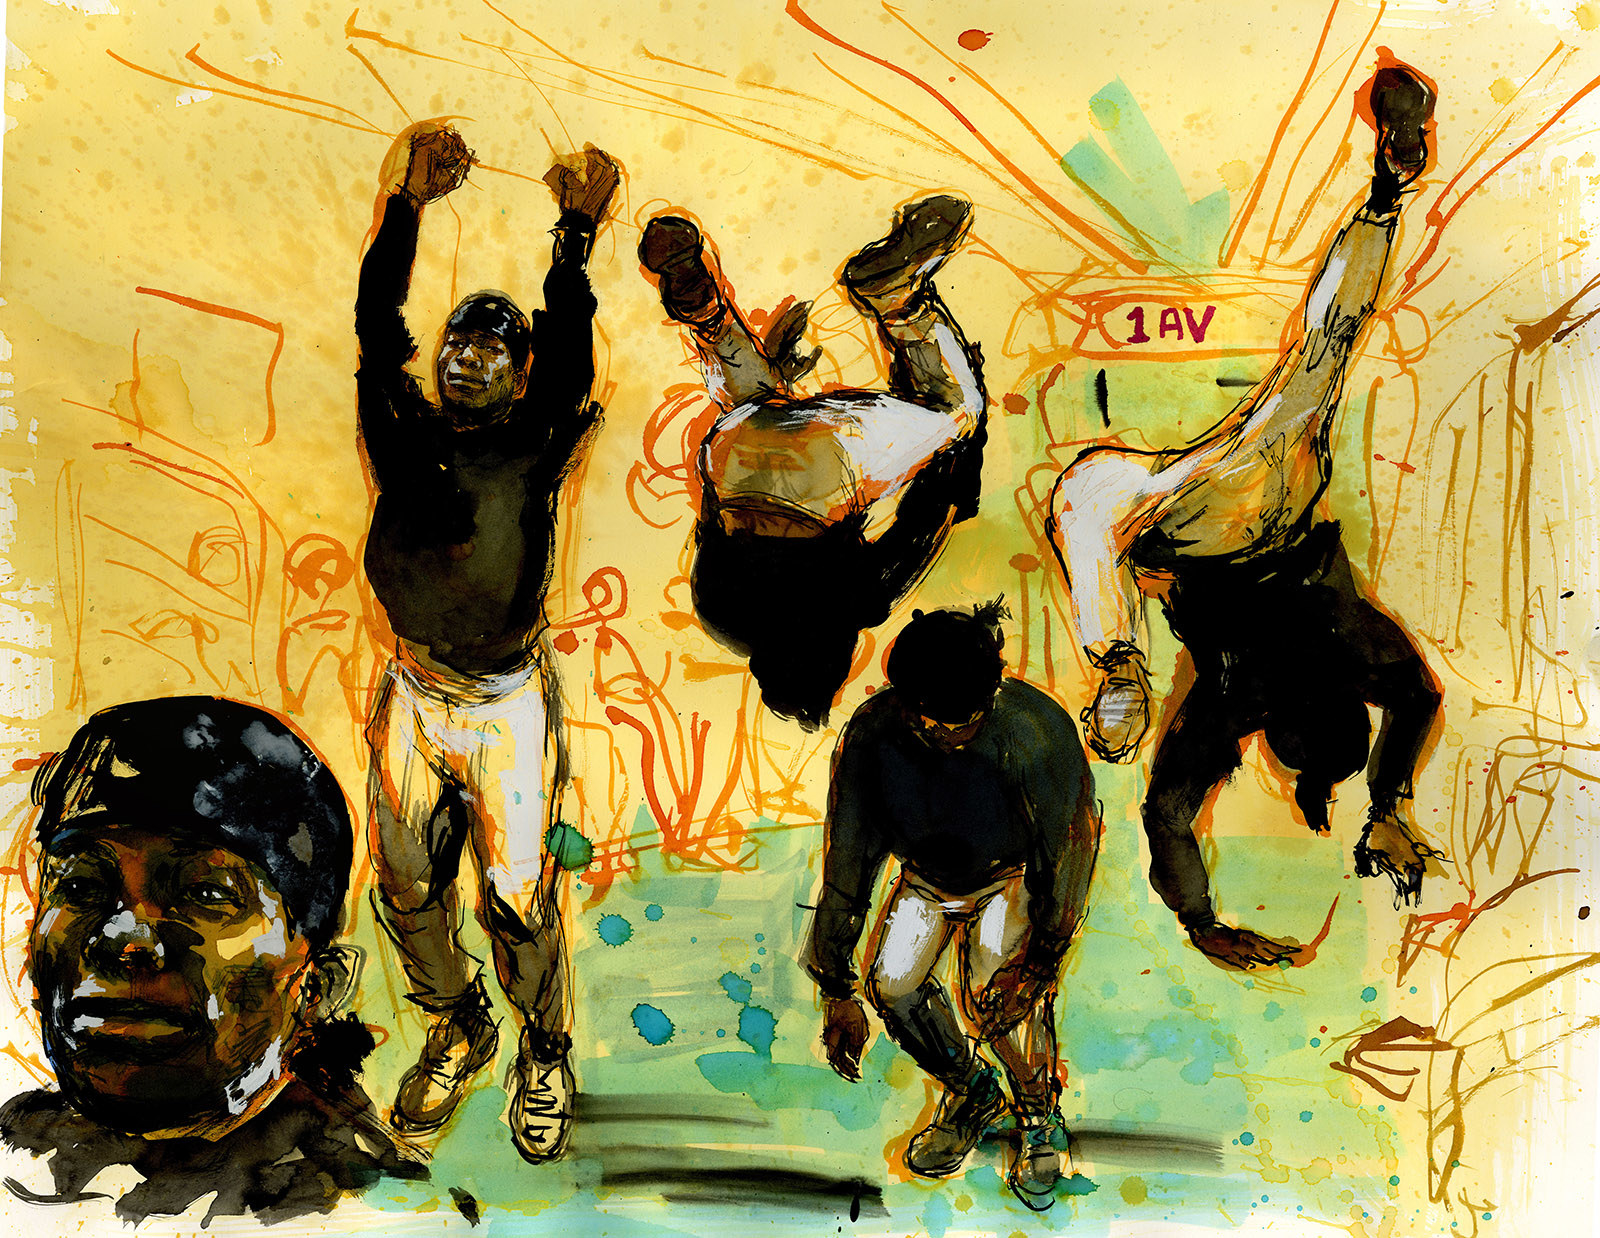 A watercolor illustration shows a man doing a backflip in four frames on a crowded subway car